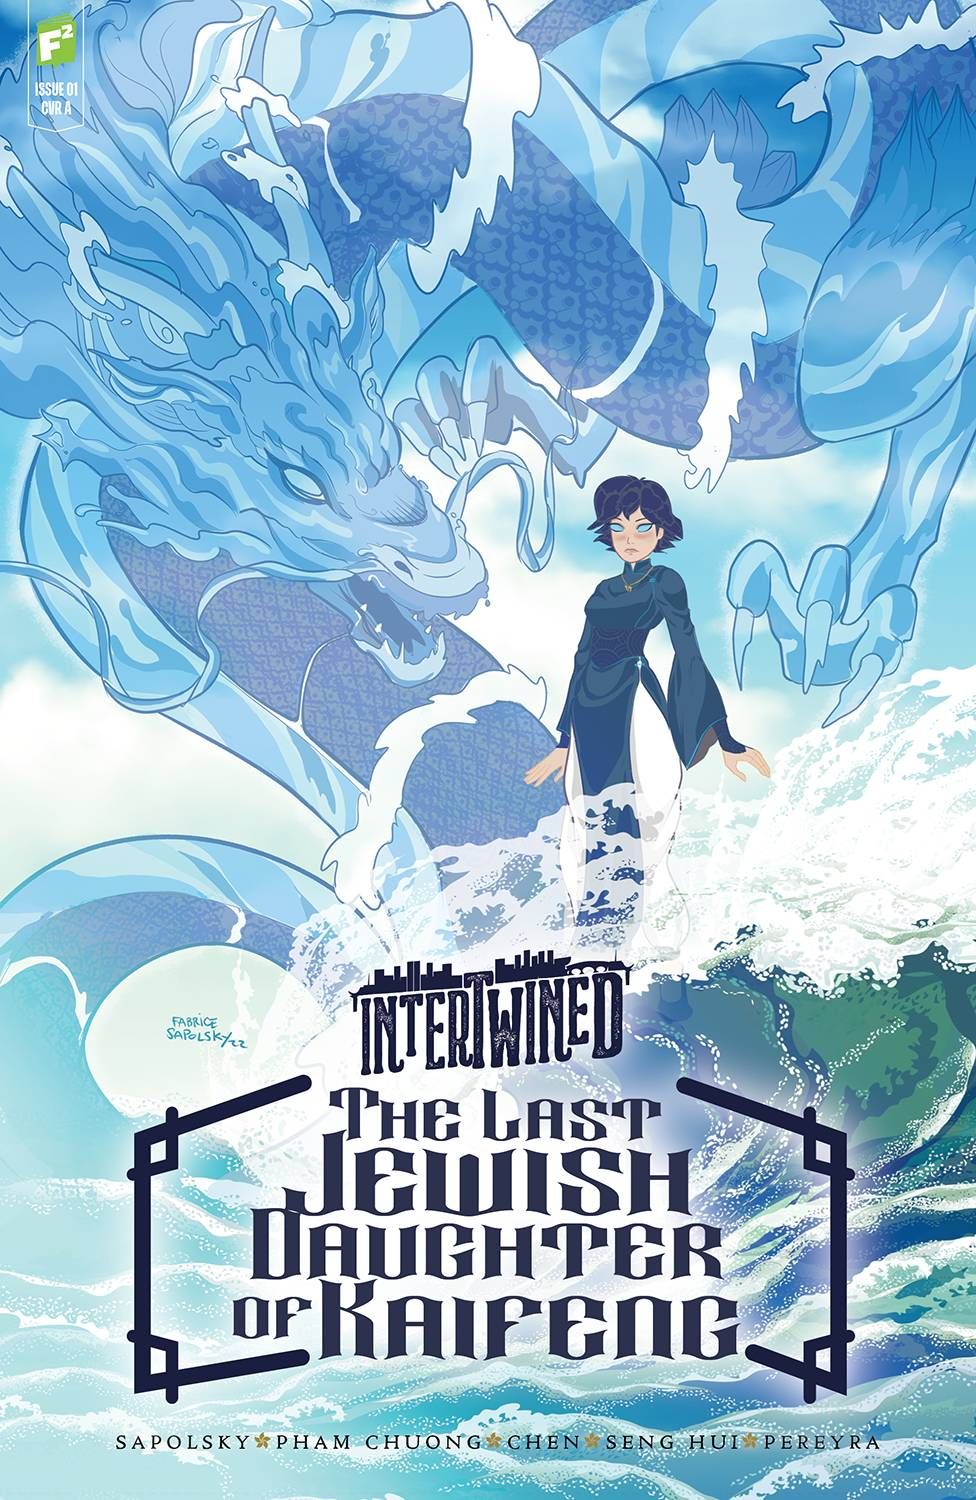 Intertwined: The Last Jewish Daughter of Kaifeng Comic